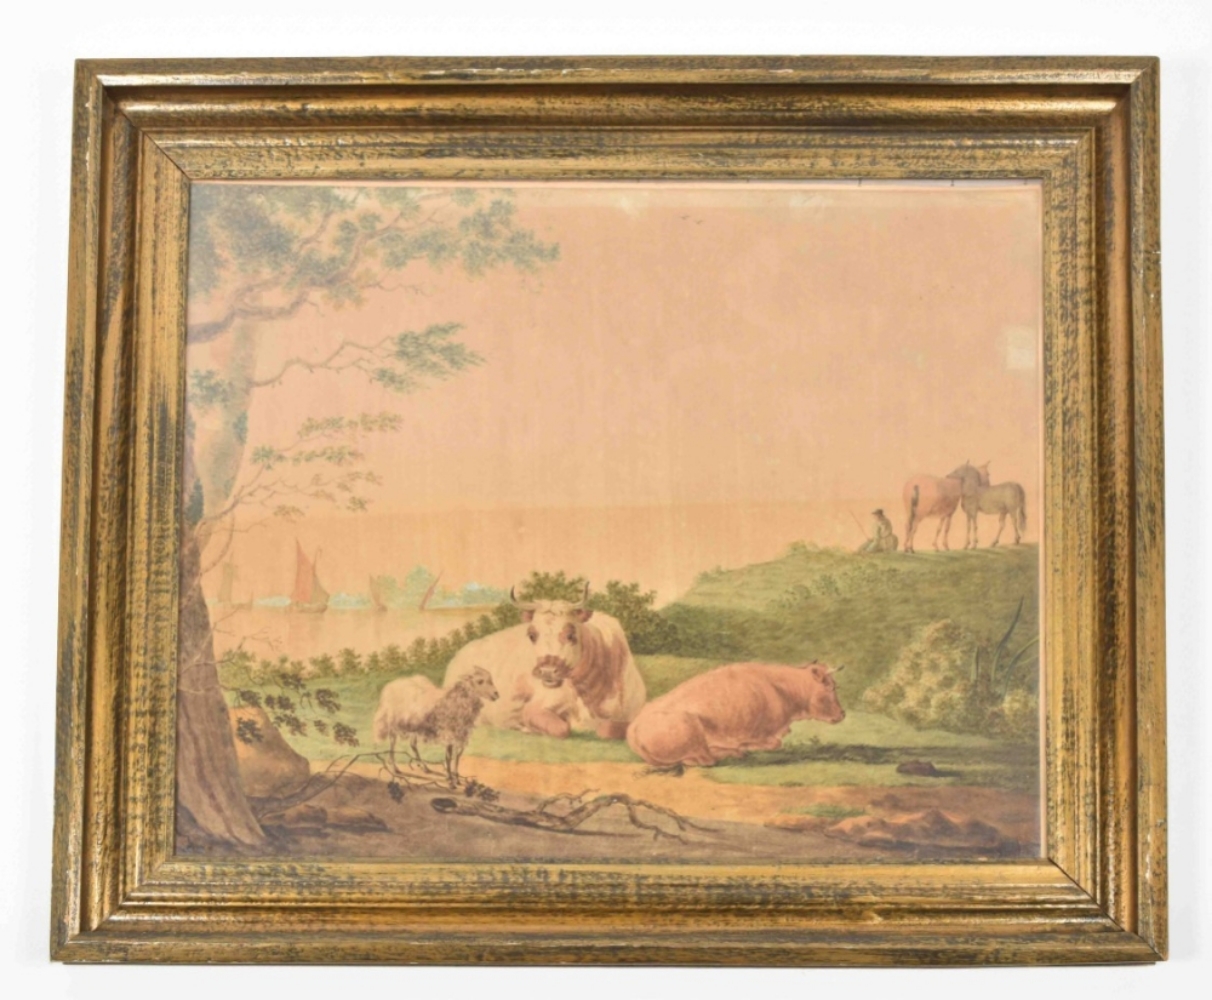 Jacob van Strij (1756-1815). "Landscape with cows and a sheep, a river in the background"